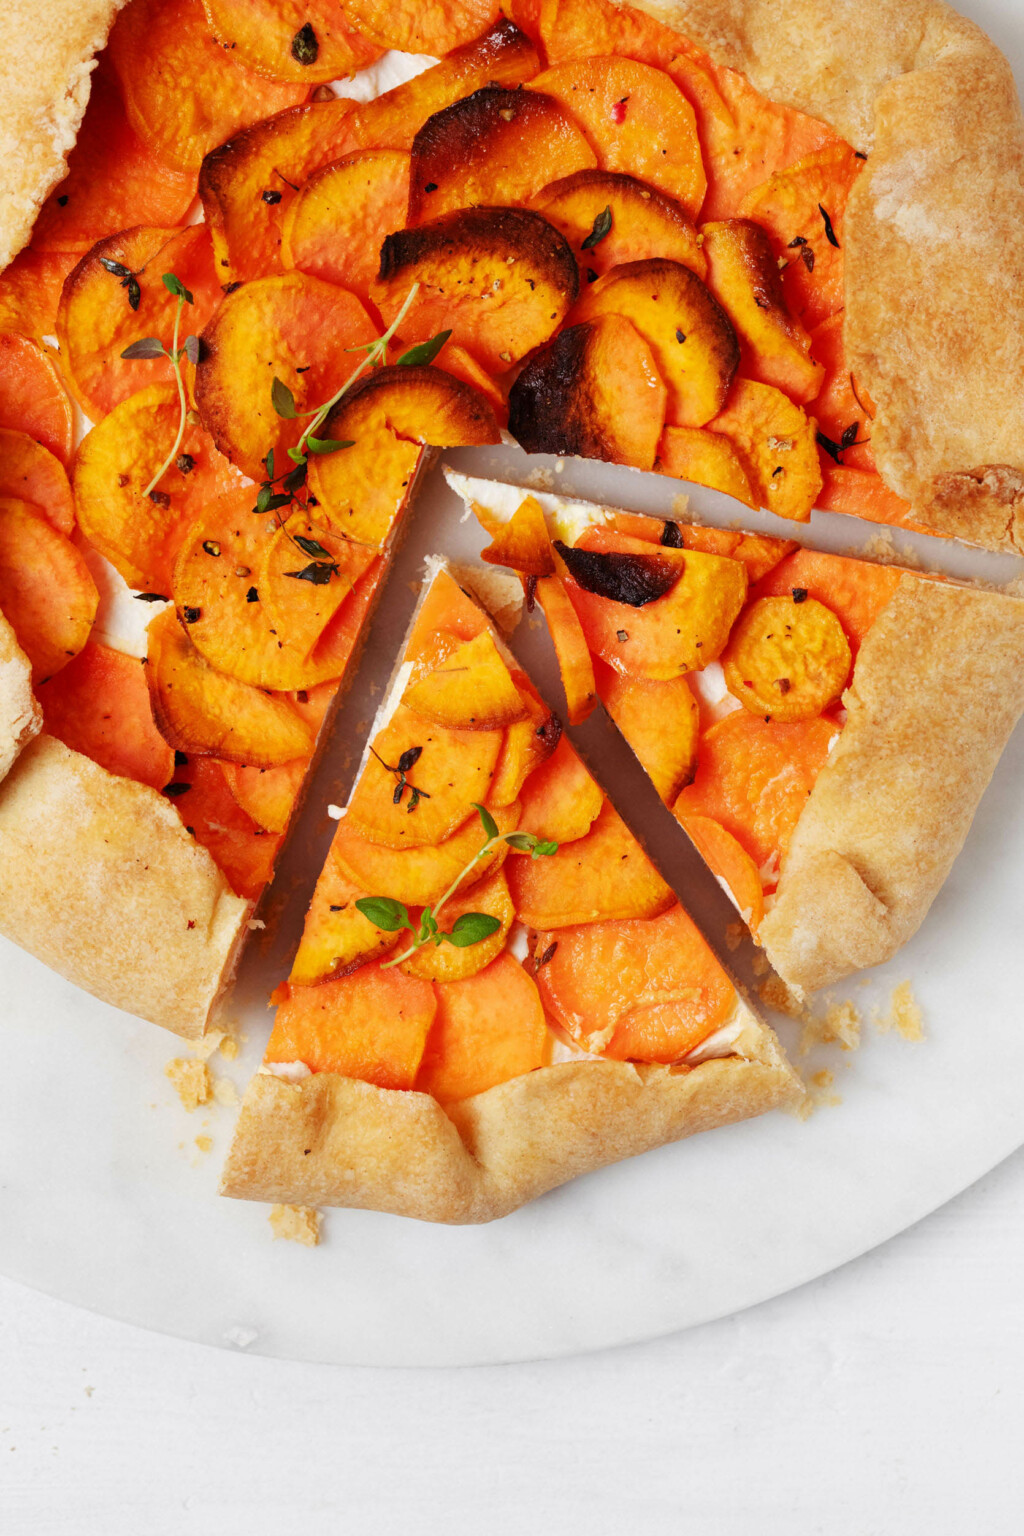 A close up, overhead image of a baked vegan sweet potato galette, which has been cut into triangle-shaped wedges.